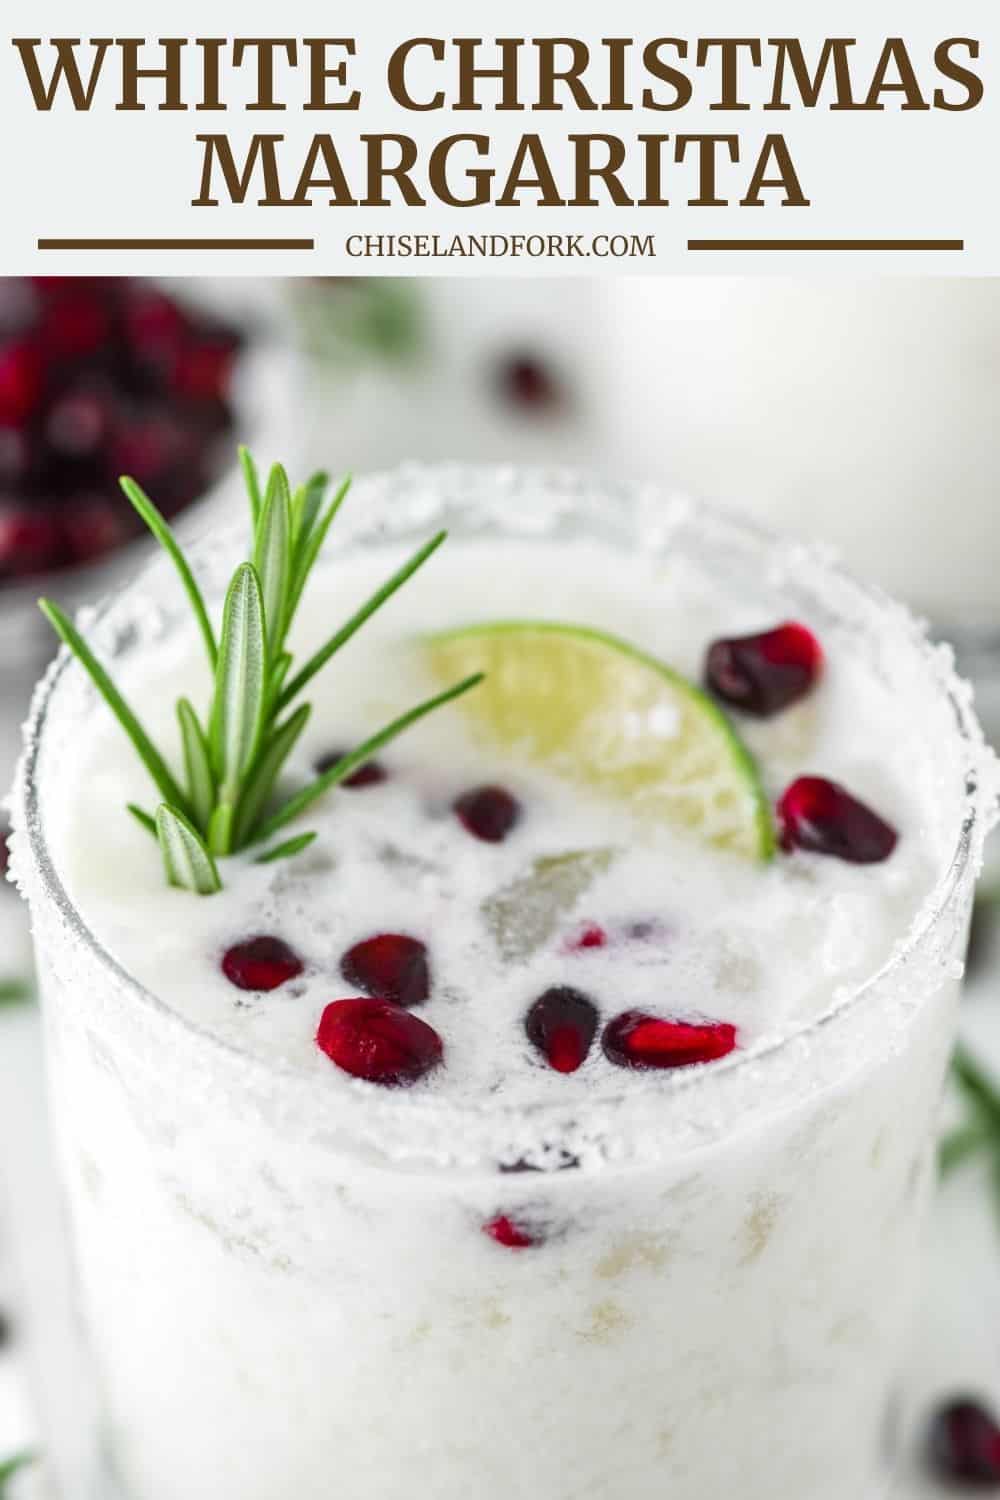 White Christmas Margarita - The Perfect Holiday Cocktail - Chisel & Fork